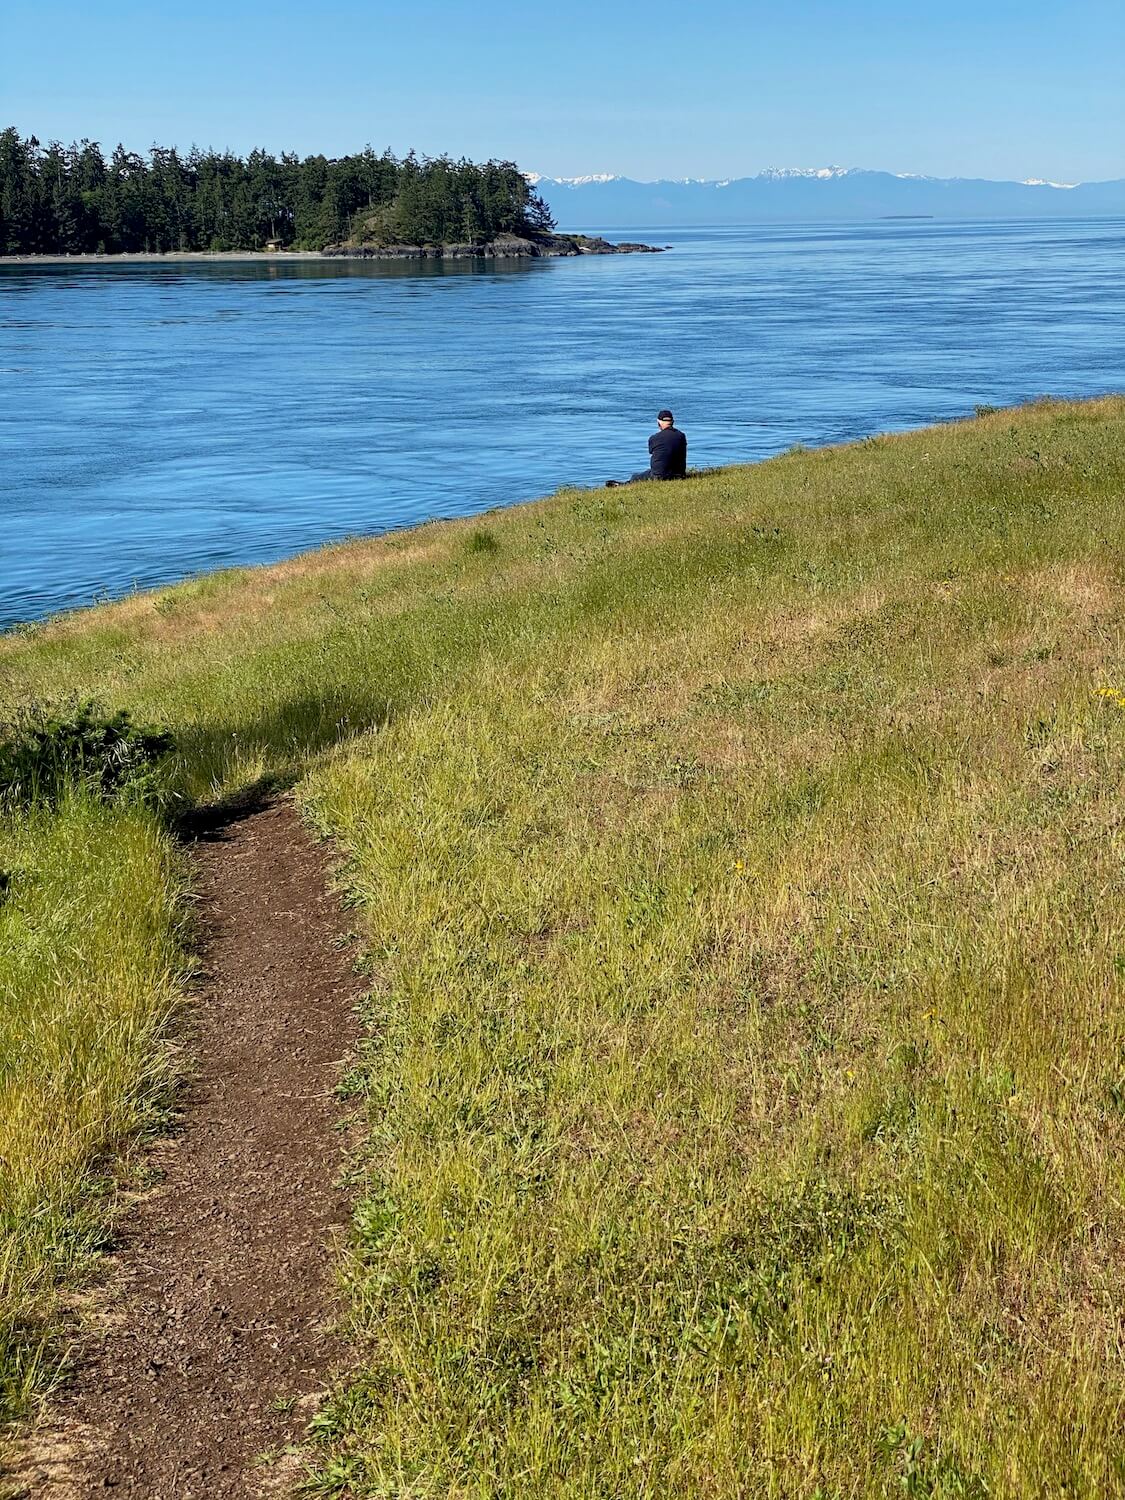 Those moving to Seattle will want to take day trips to explore areas like this grassy hill overlooking the rich blue Salish Sea with the snow-capped Olympic Mountains in the background.